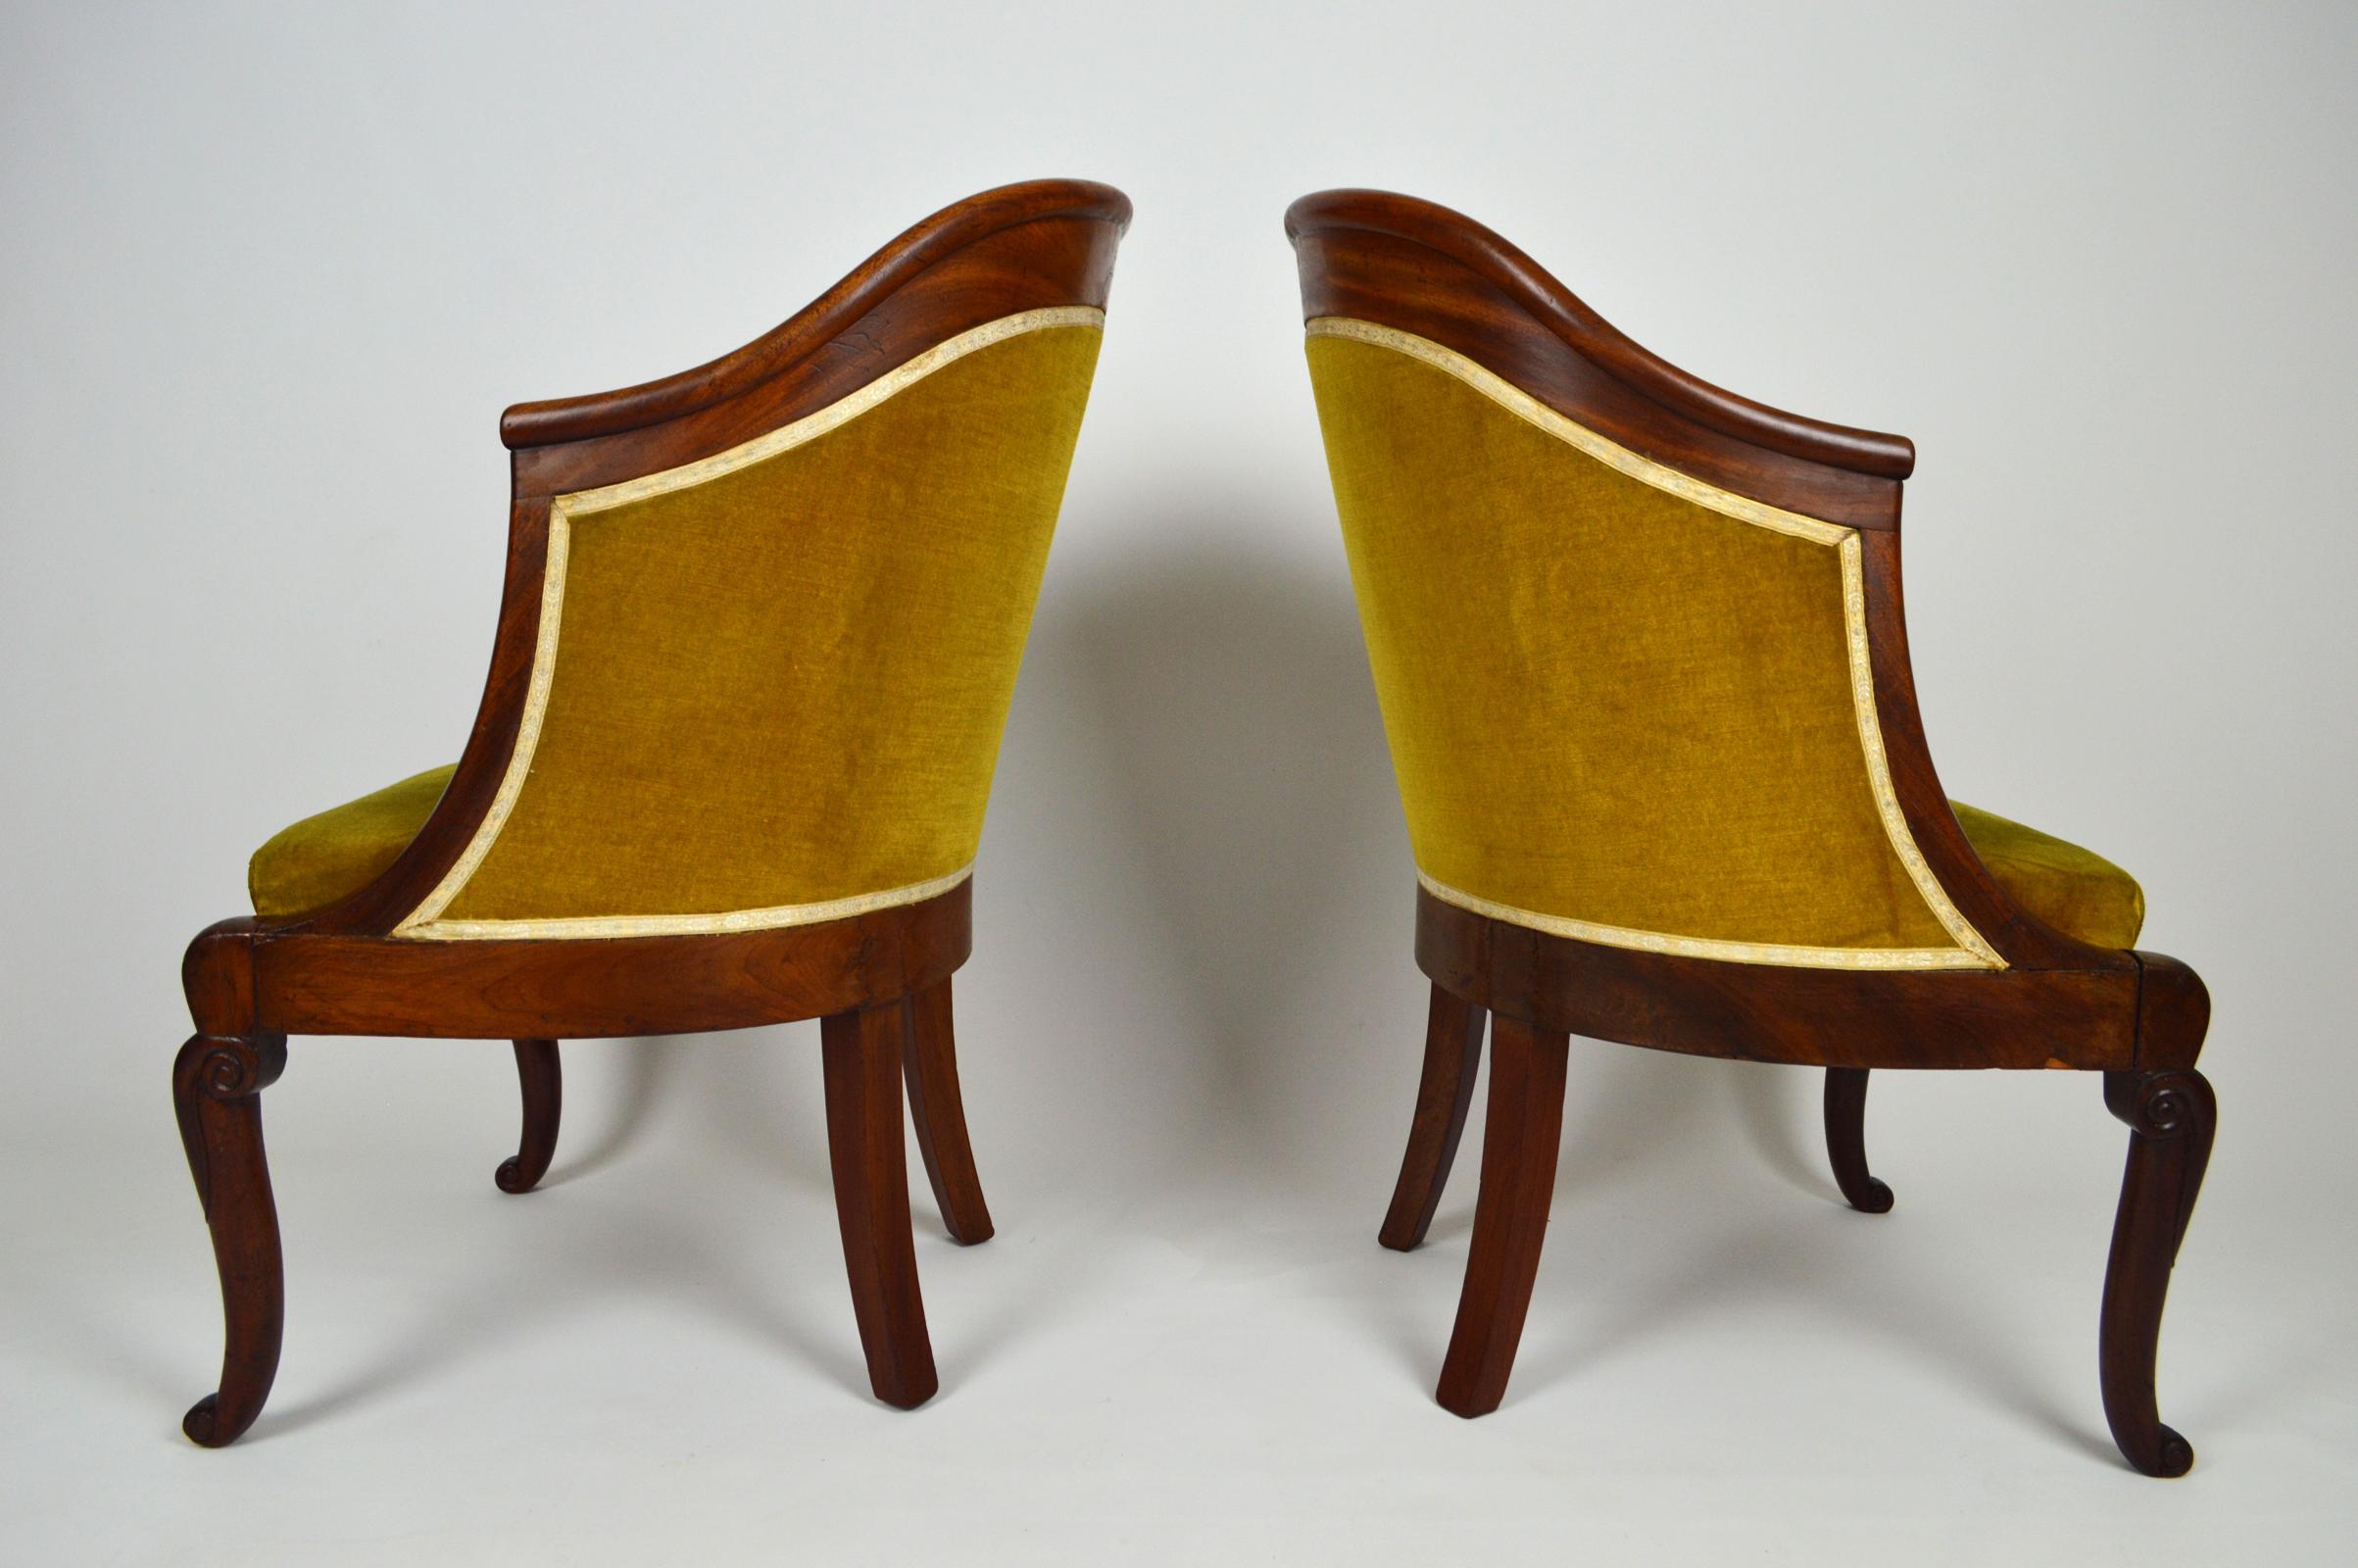 Restauration Pair of Armchairs / Tub Chairs in Carved Mahogany, France, Early 19th Century For Sale